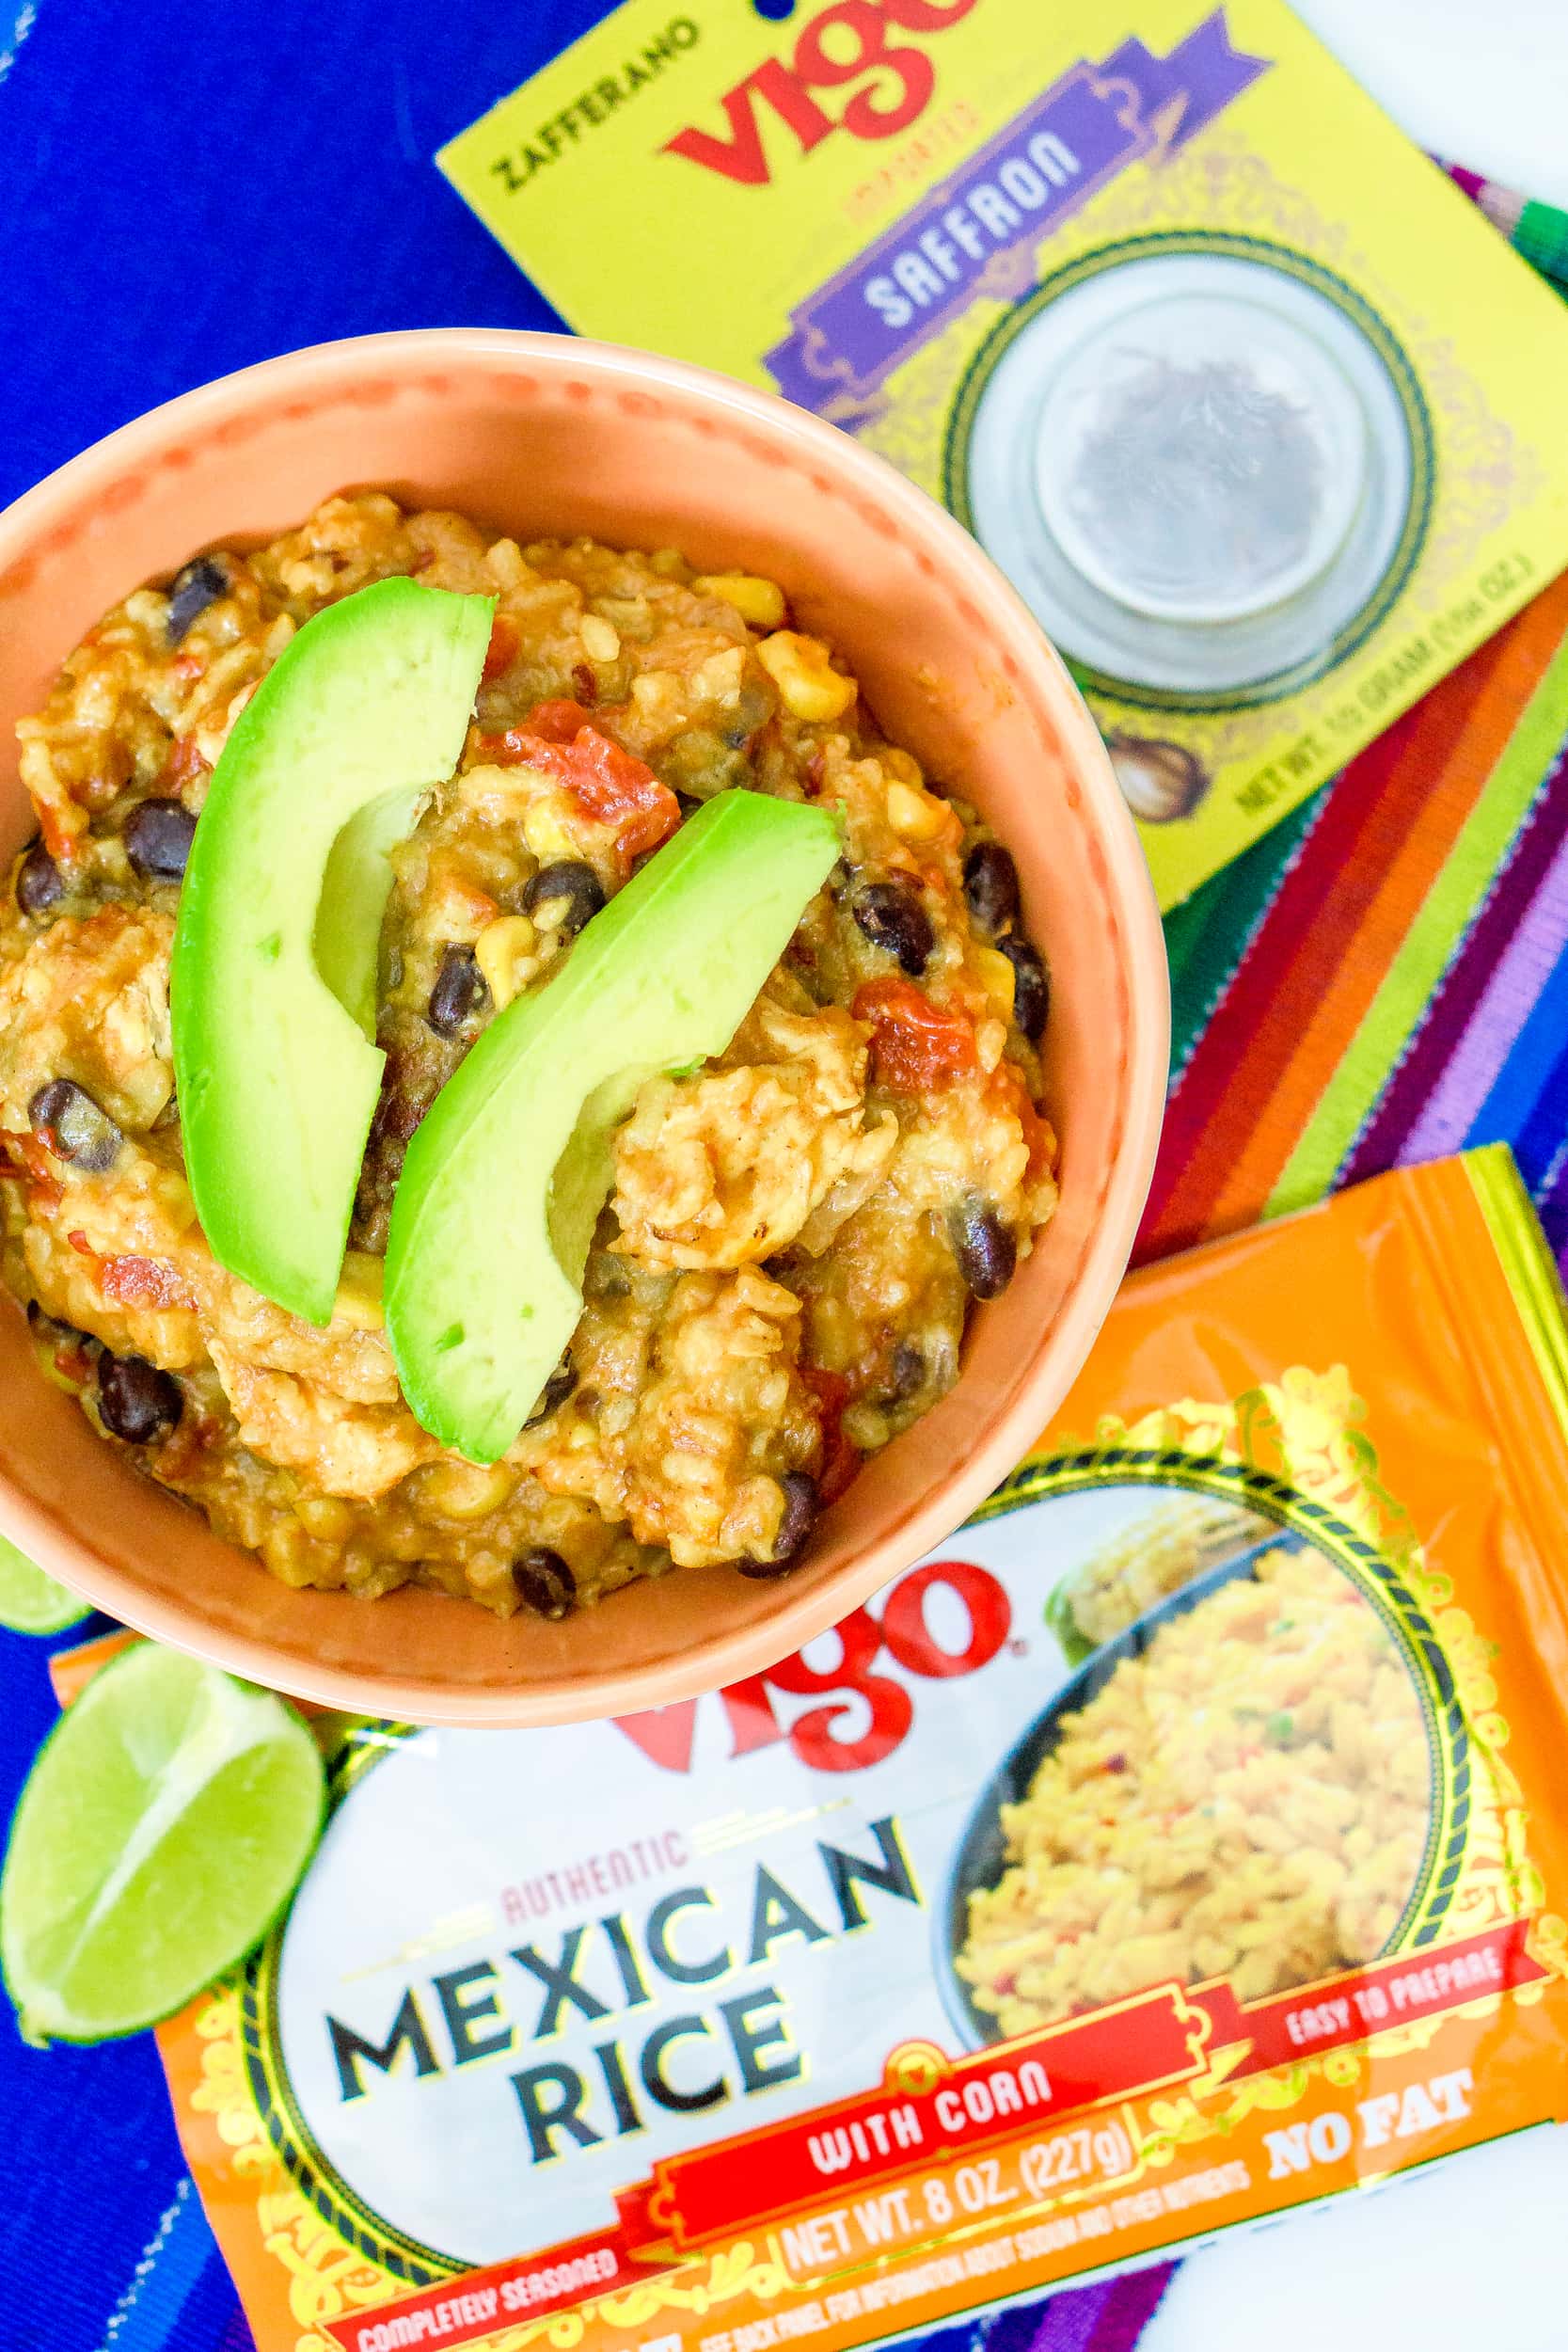 Instant Pot Mexican Rice Casserole